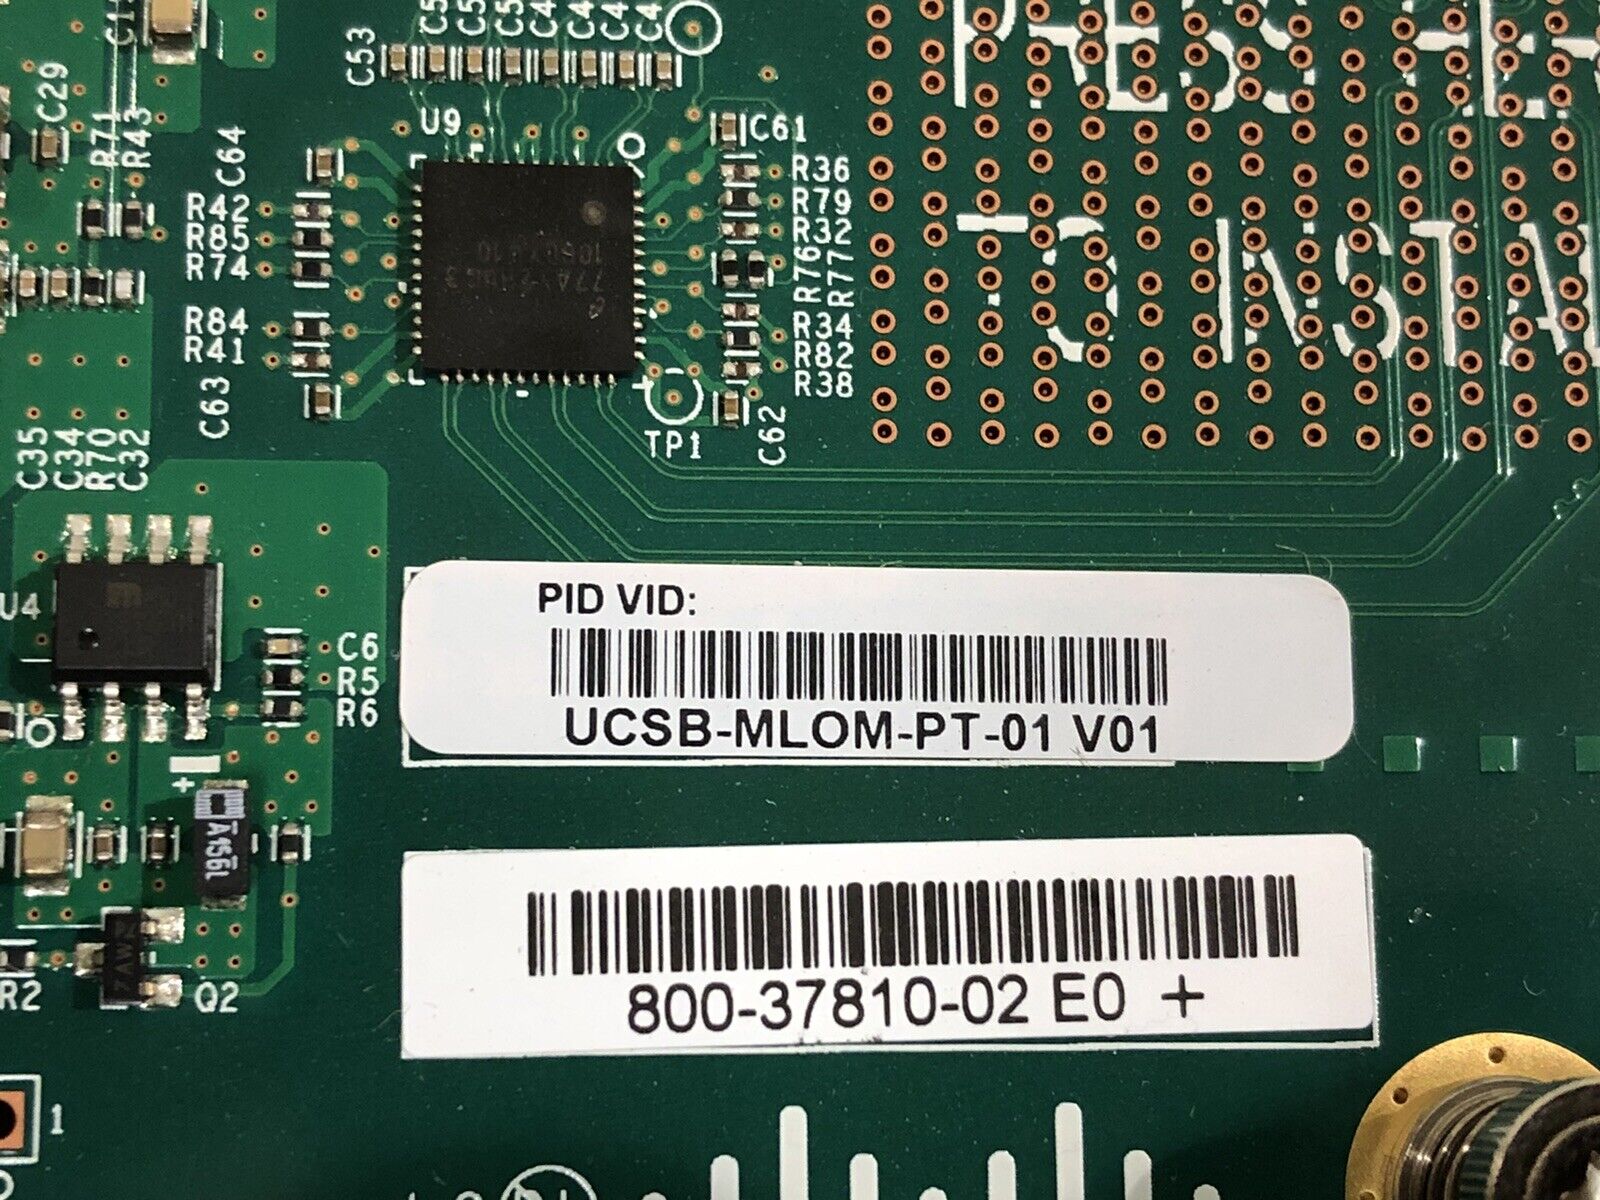 Cisco UCSB-MLOM-PT-01 UCS Port Expander for VIC 1240 and 1340 Additional 4 Ports.